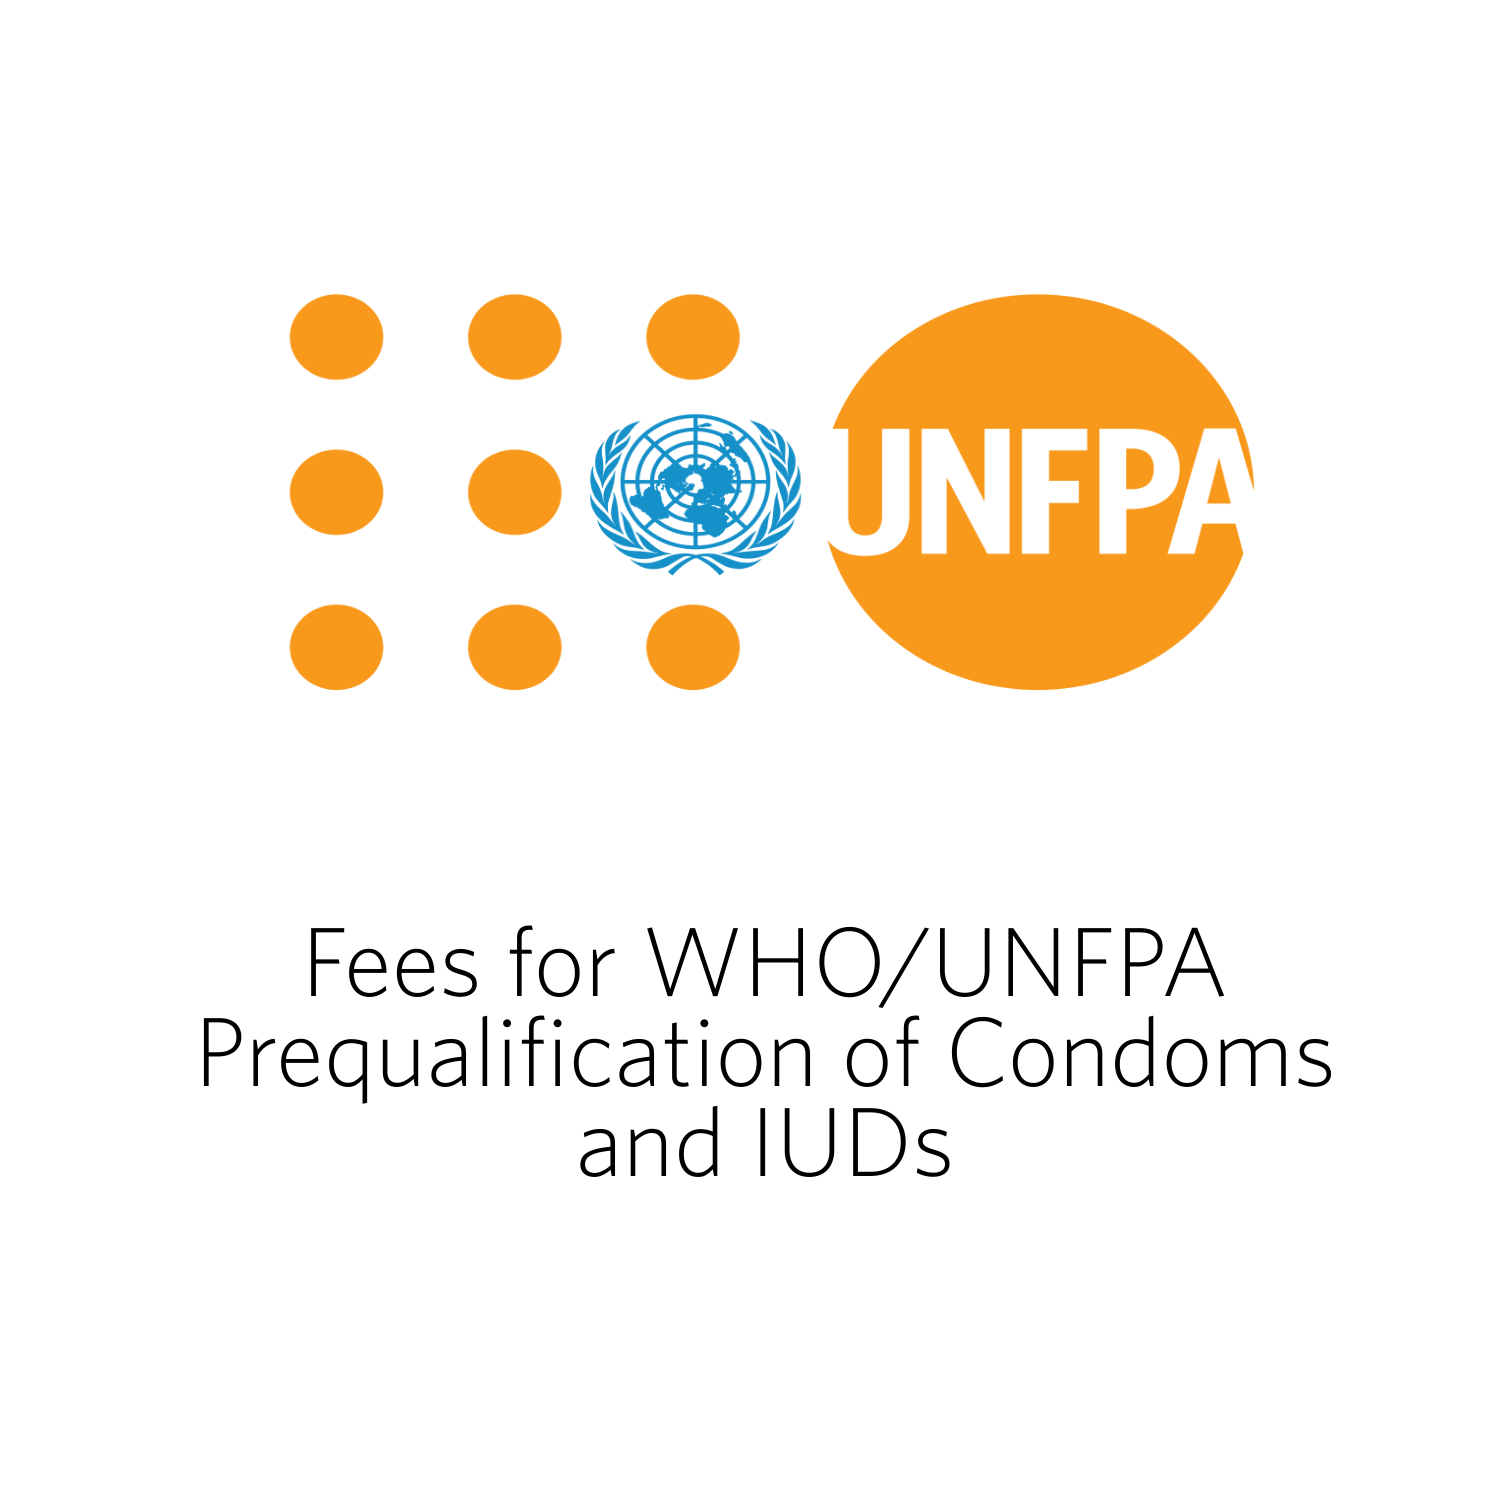 Fees for WHO/UNFPA Prequalification of Condoms and IUDs